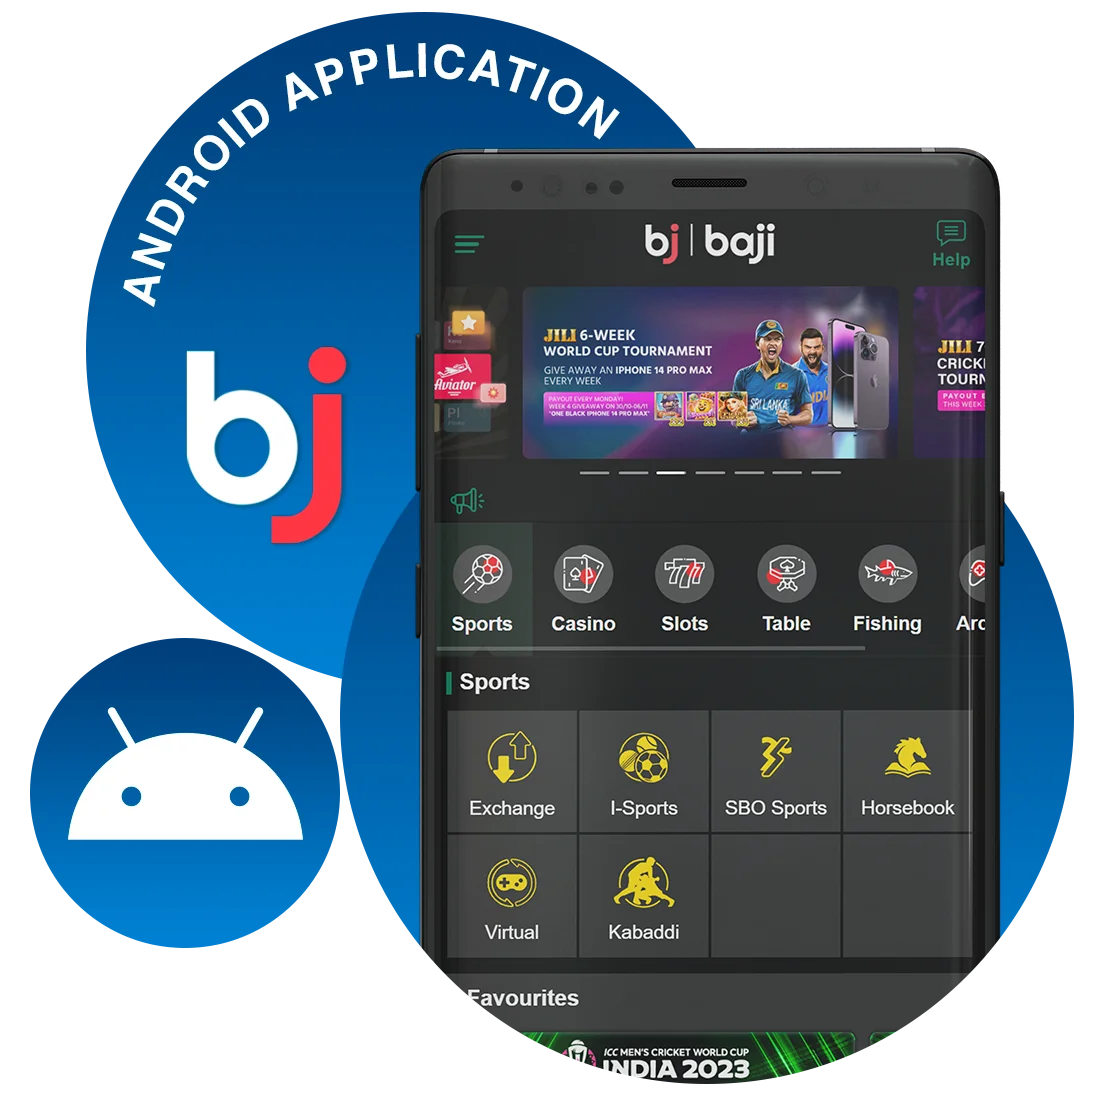 Full Instruction about how to install Baji App on Android